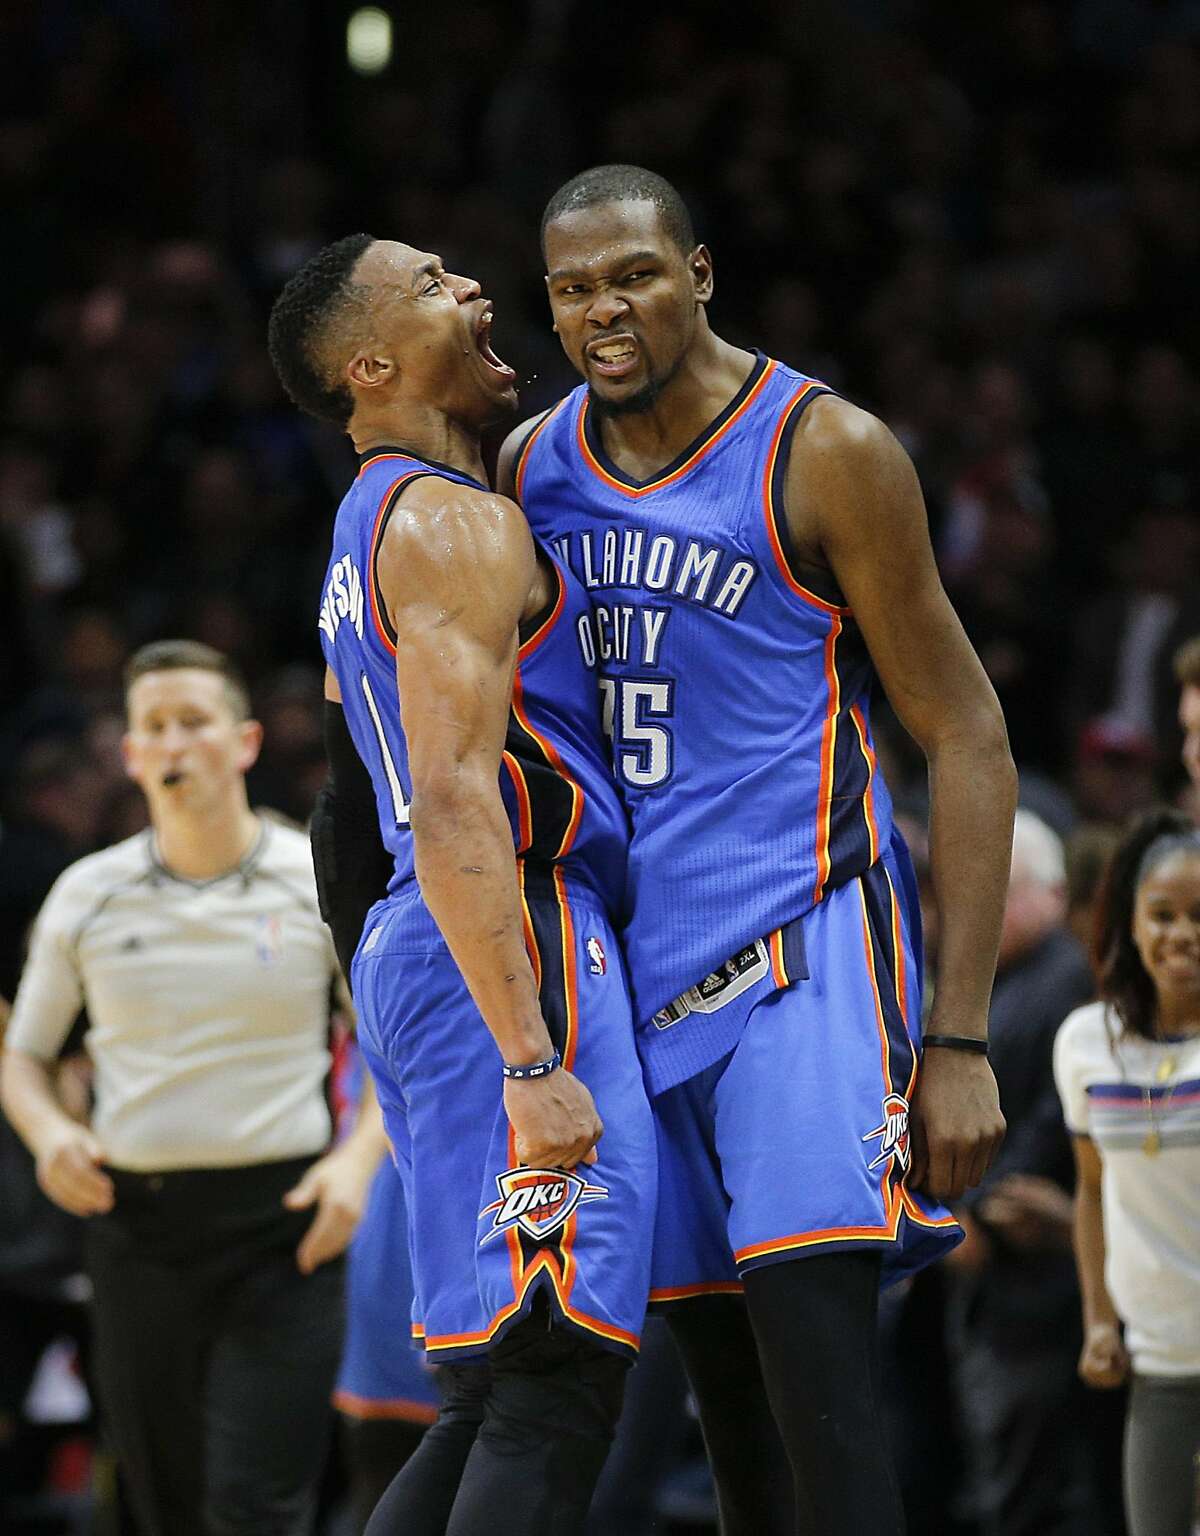 Oklahoma City Thunder's Kevin Durant, right, and Russell Westbrook celebrate their team's 100-99 win over the Los Angeles Clippers in an NBA basketball game, Monday, Dec. 21, 2015, in Los Angeles. (AP Photo/Jae C. Hong)